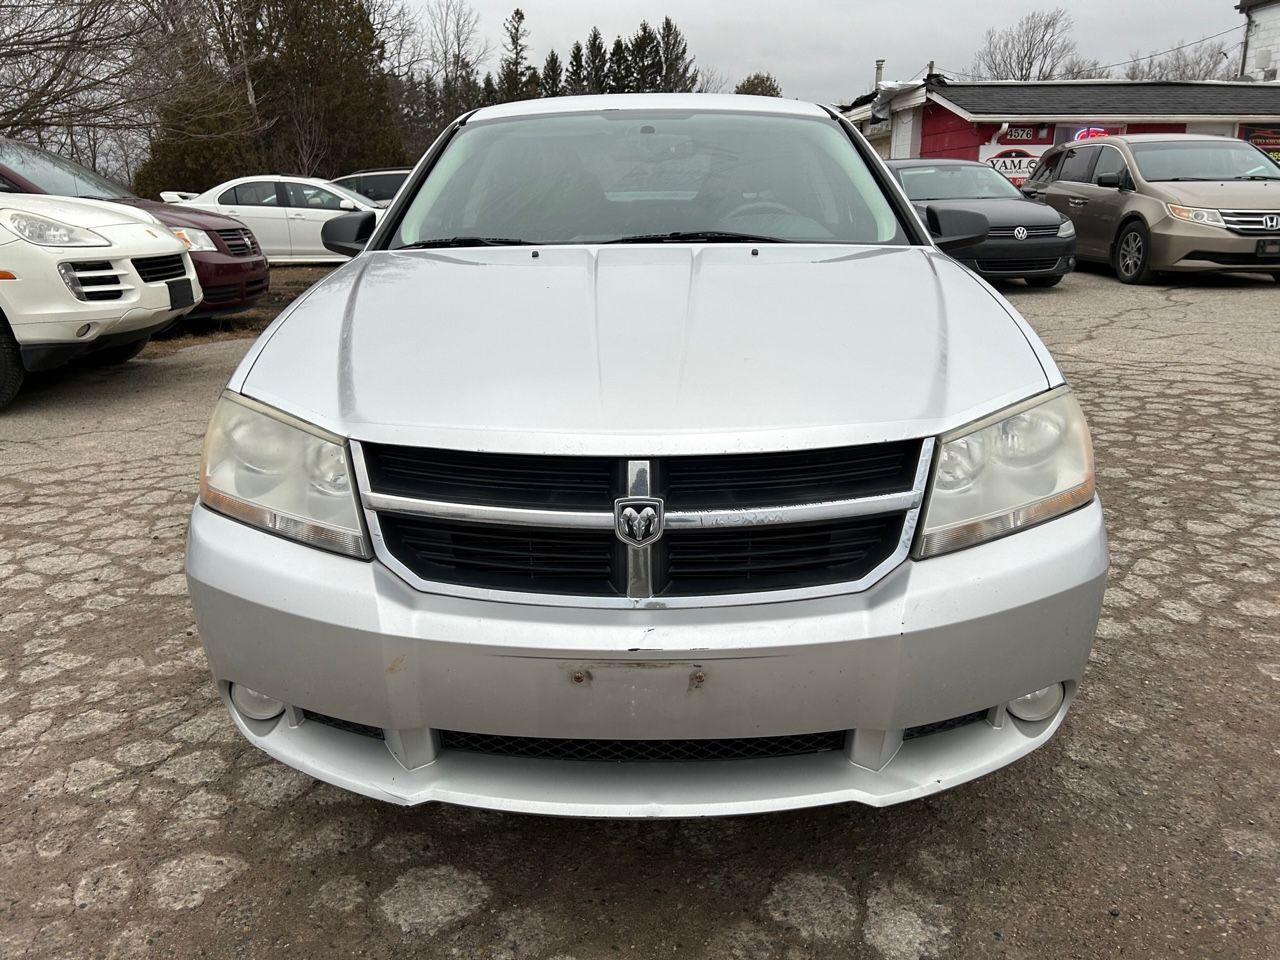 2010 Dodge Avenger SXT*4CYLINDER*DRIVES GOOD*GREAT ON GAS*AS IS SPE** - Photo #2